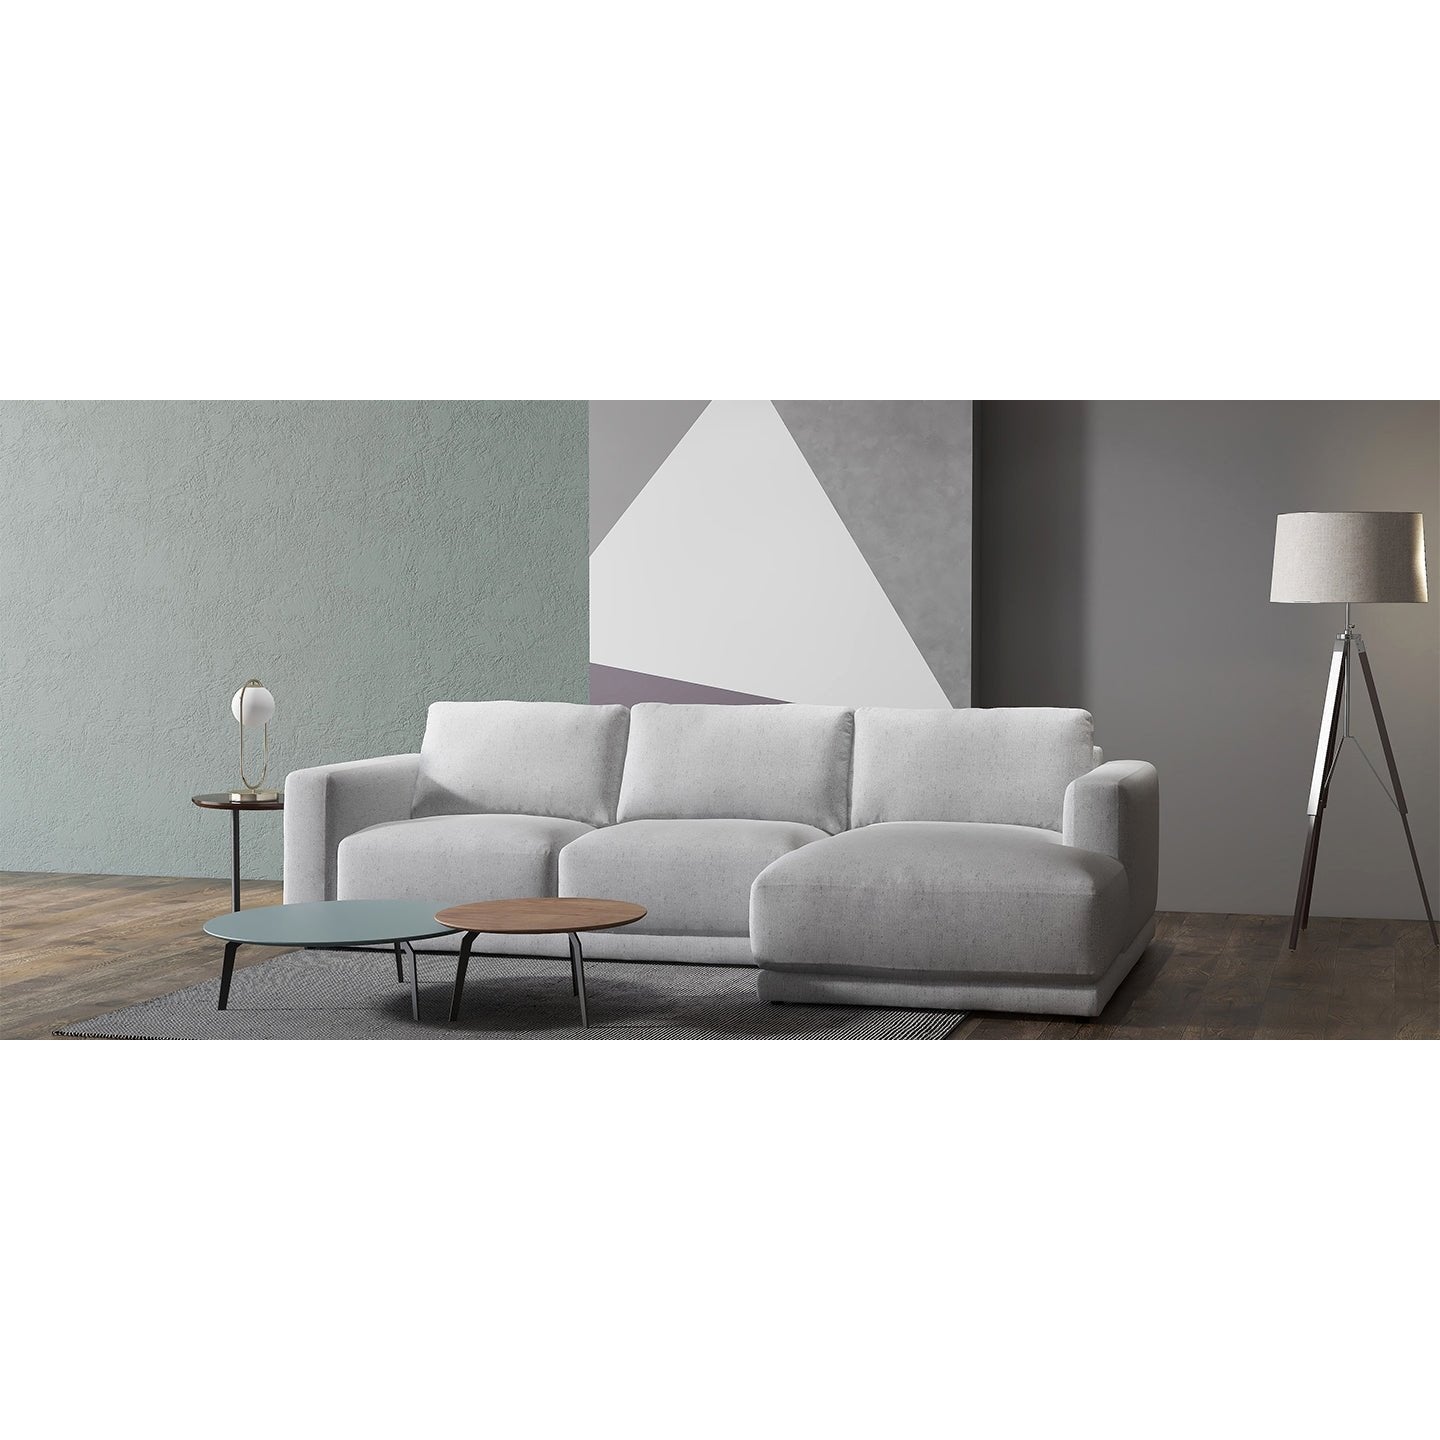 GREY FABRIC SECTIONAL